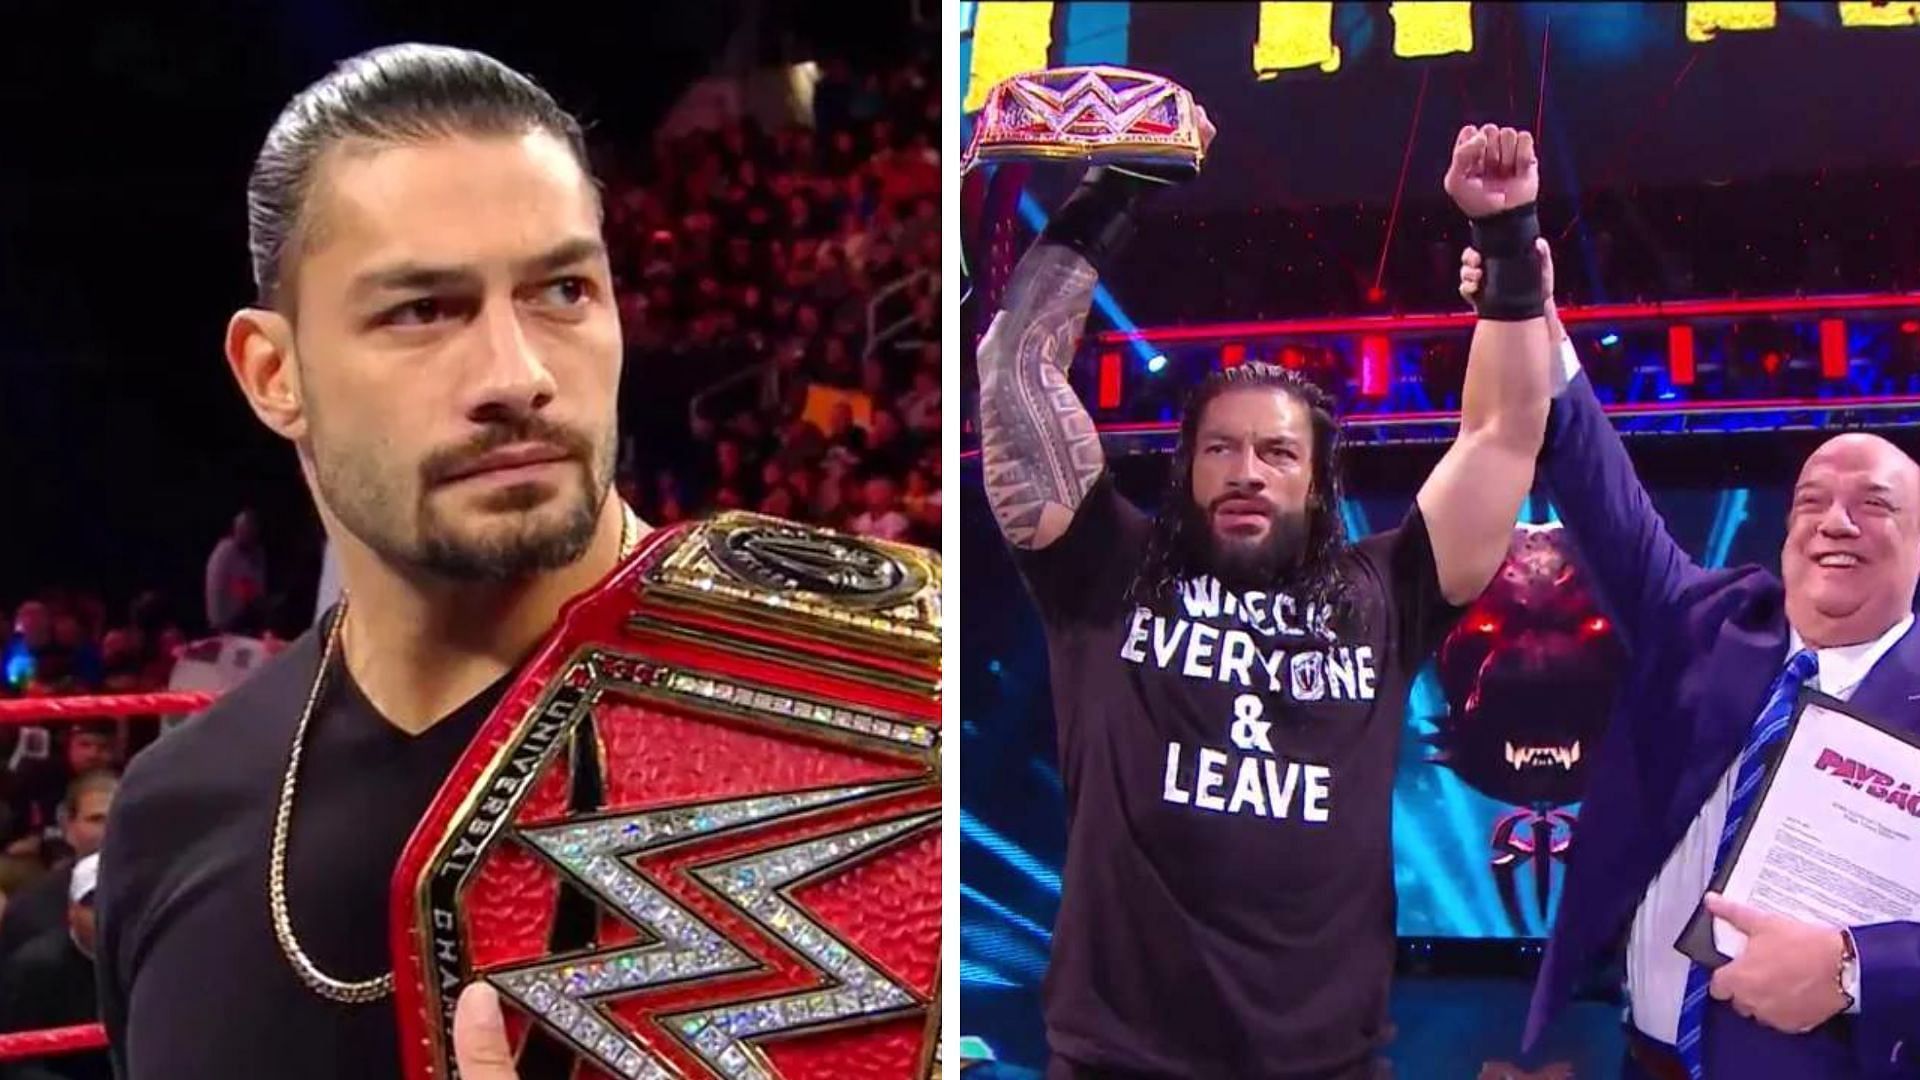 Roman Reigns is a two-time Universal Champion